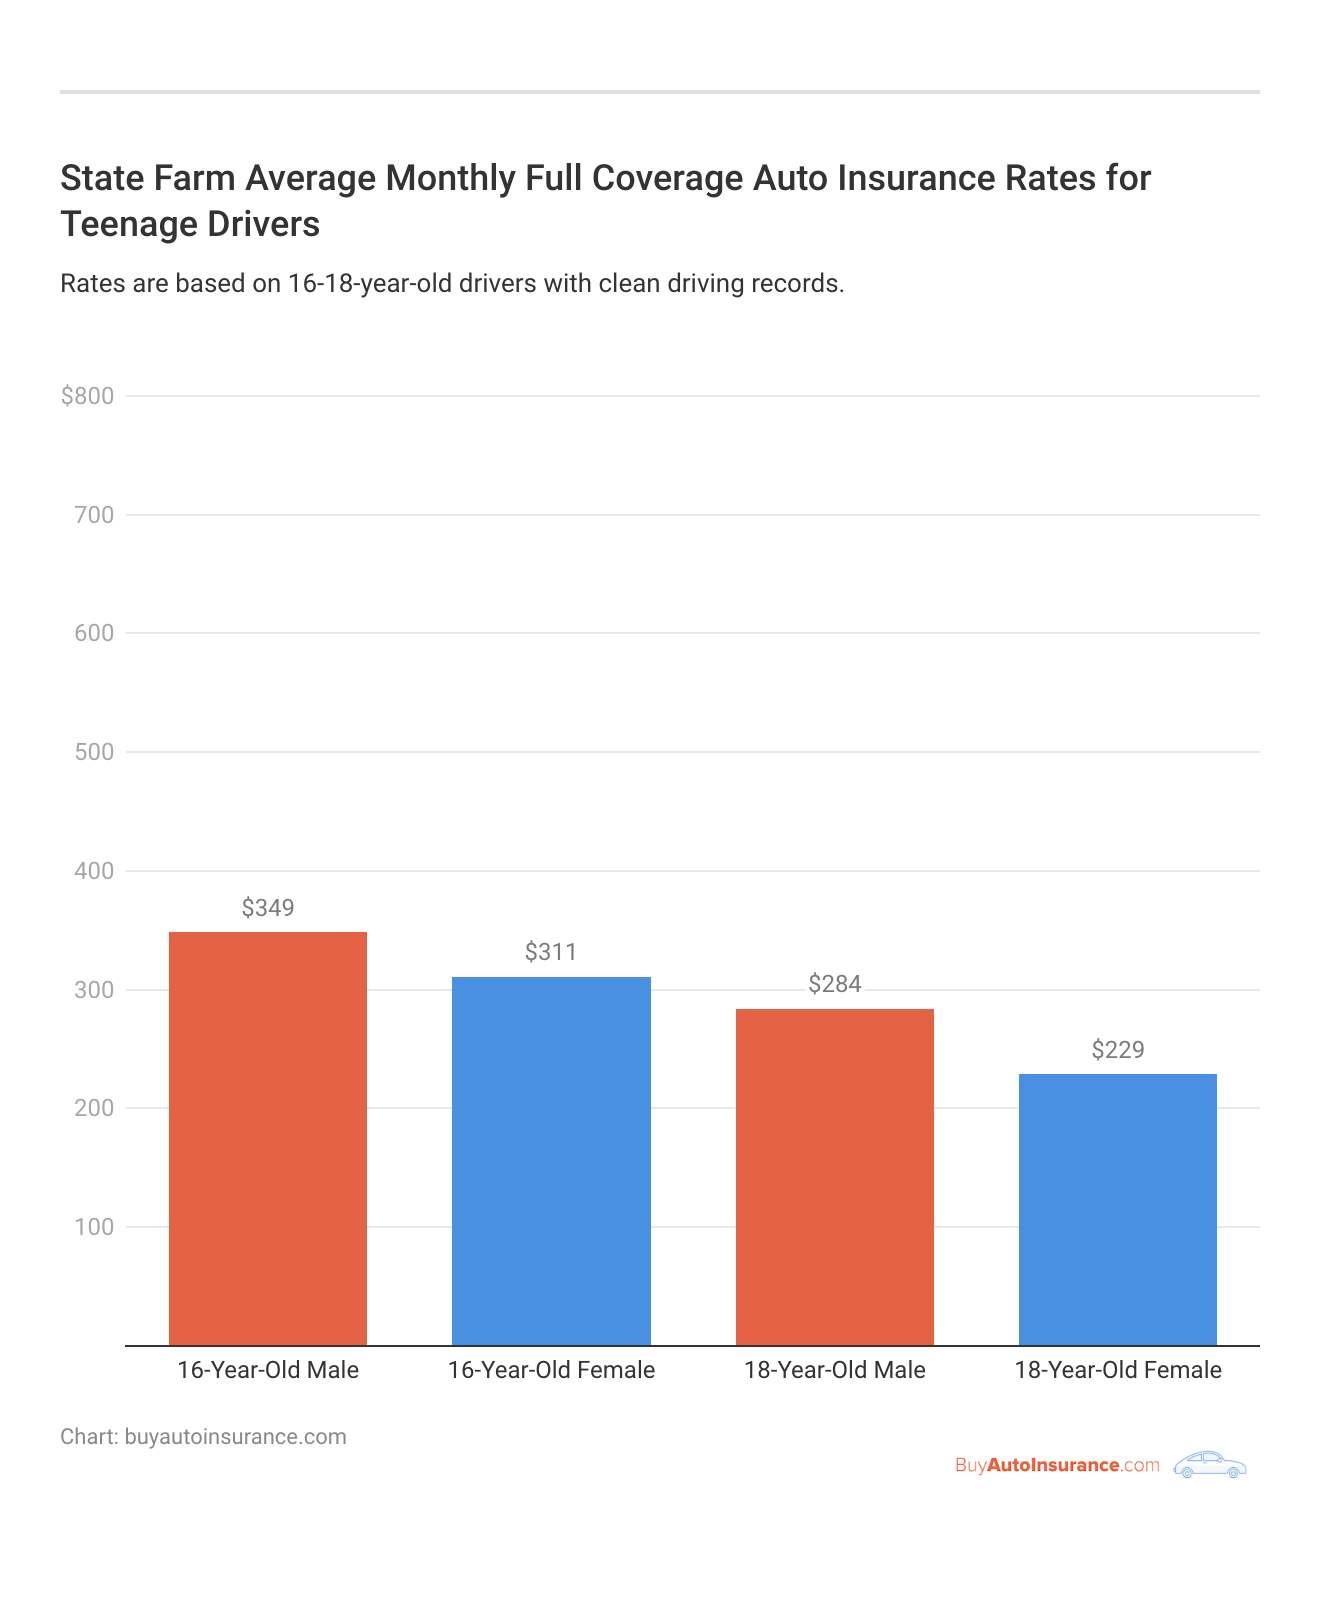 <h3>State Farm Average Monthly Full Coverage Auto Insurance Rates for Teenage Drivers</h3>